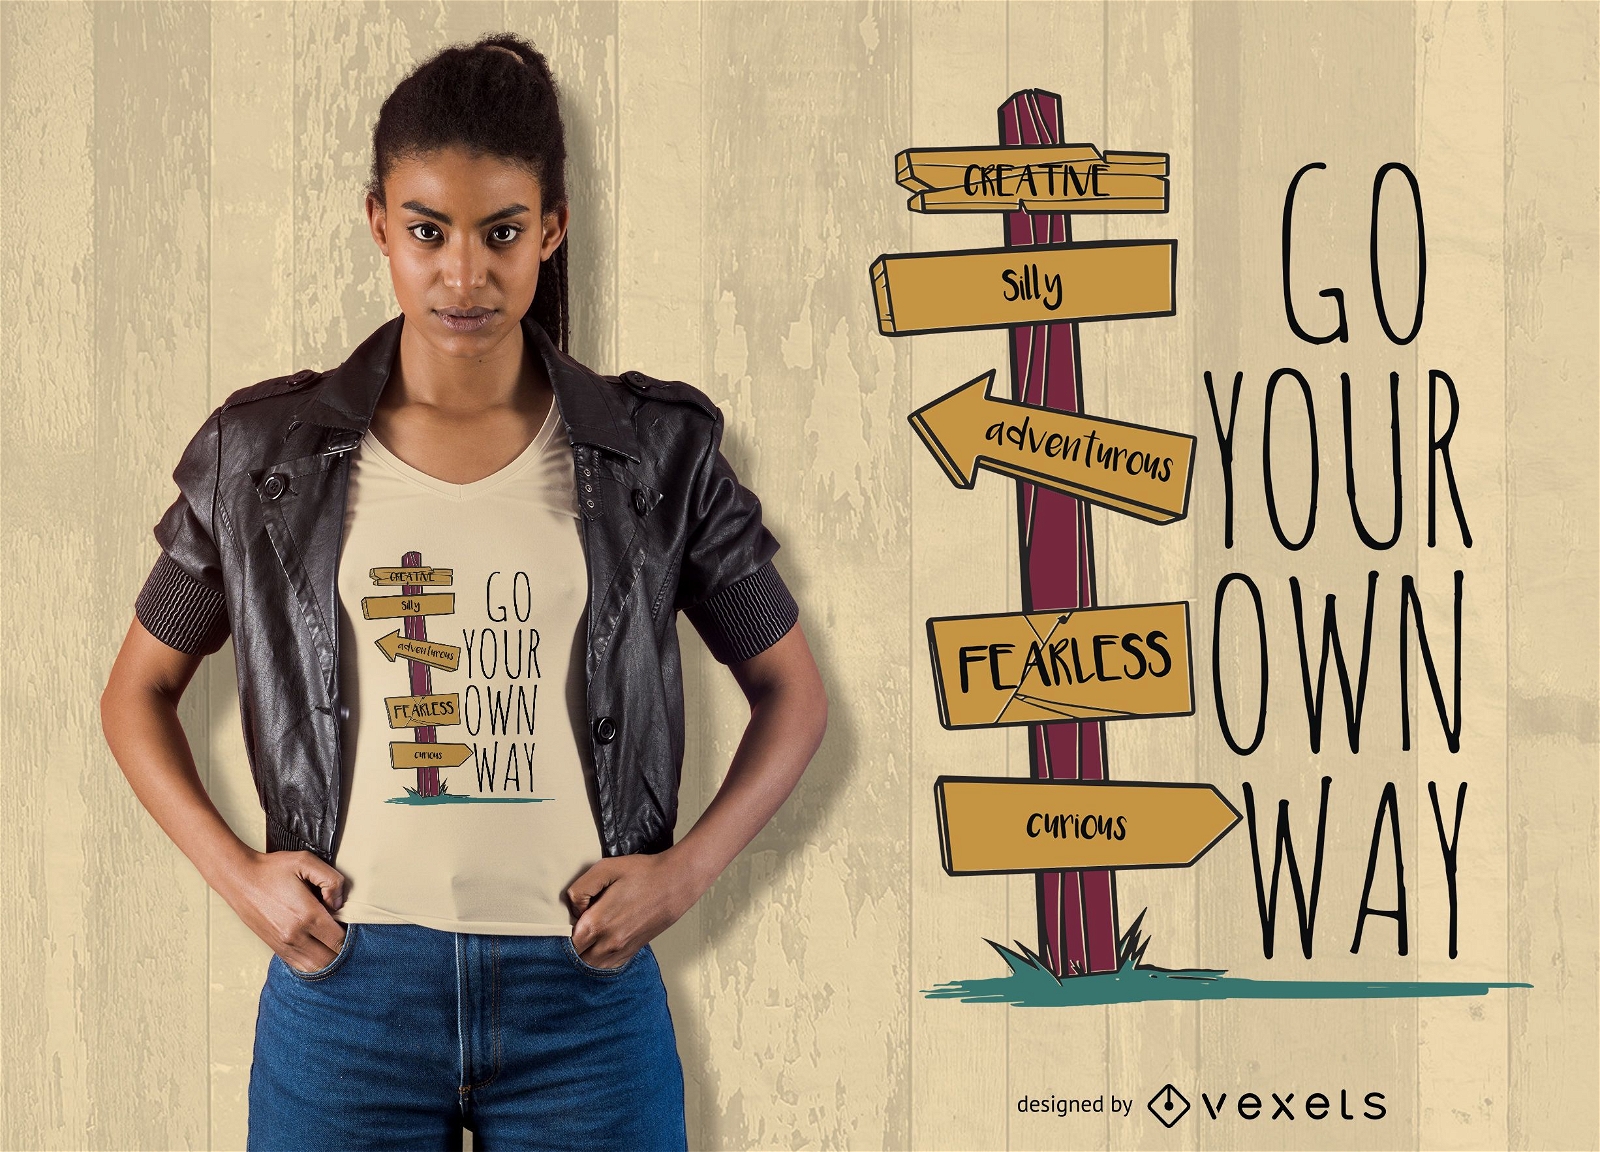 Your own way t-shirt design